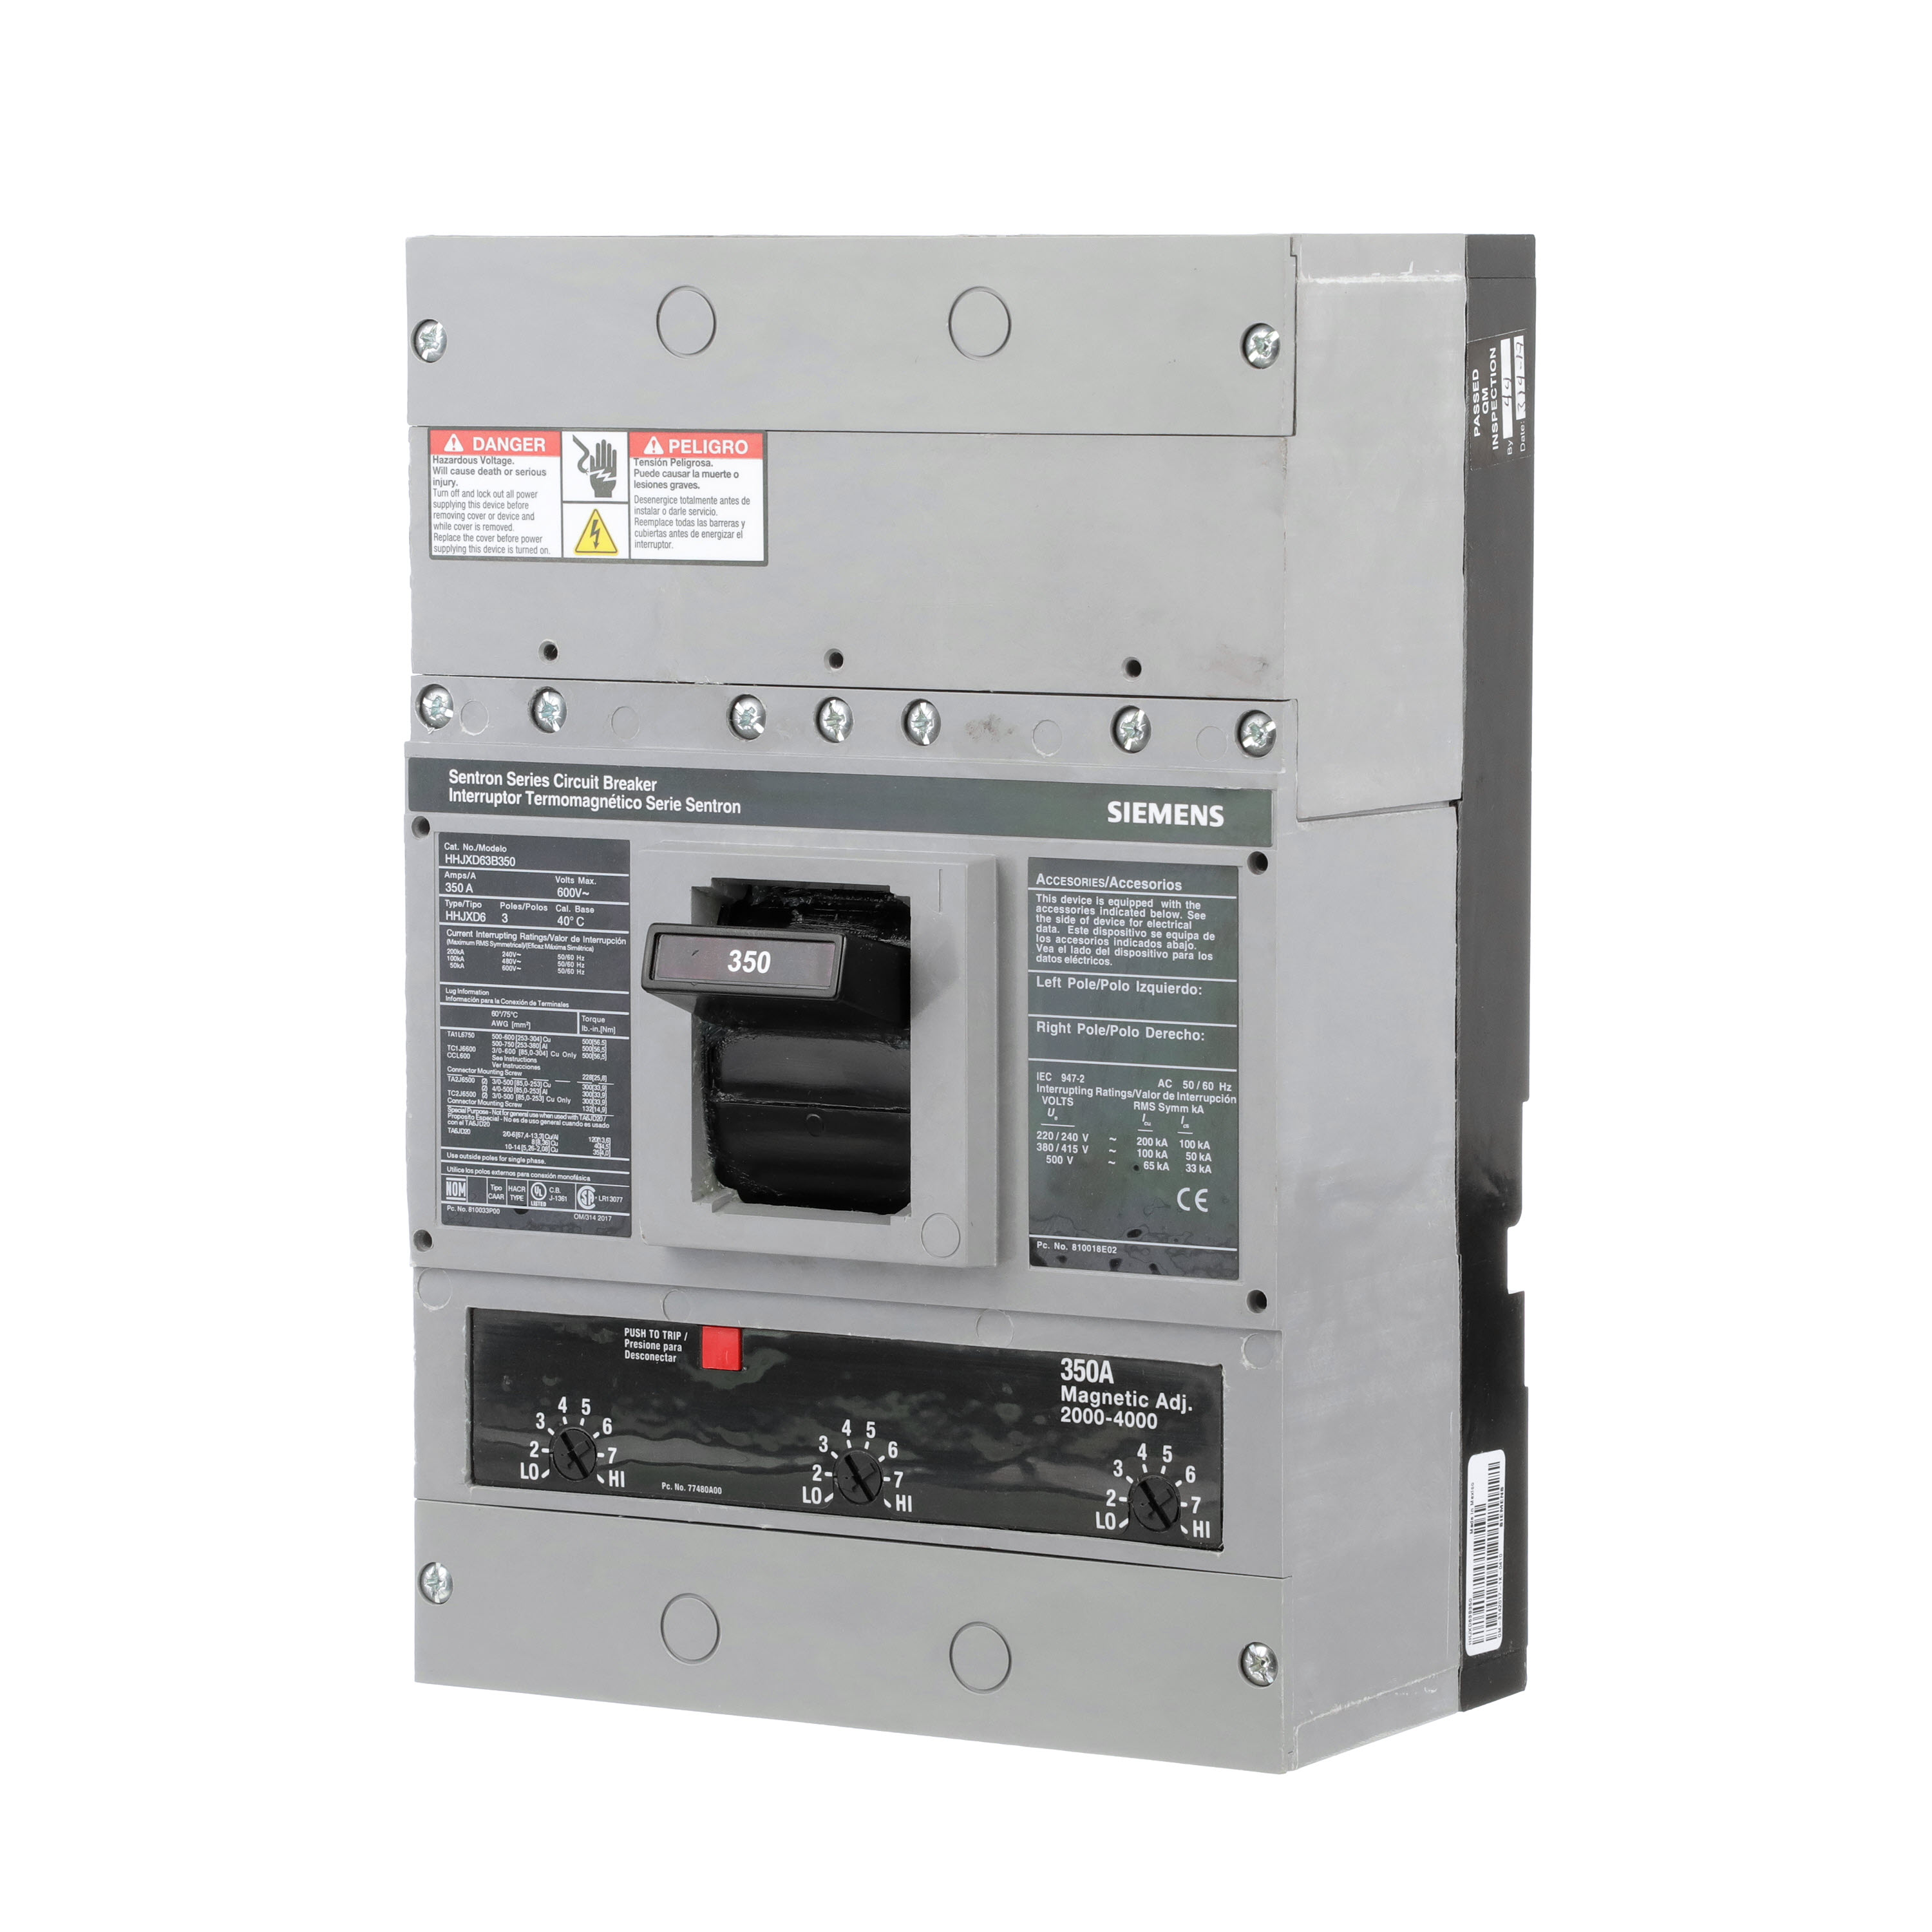 SIEMENS LOW VOLTAGE SENTRON MOLDED CASE CIRCUIT BREAKER WITH THERMAL - MAGNETICTRIP UNIT. ASSEMBLED STANDARD 40 DEG C BREAKER JD FRAME WITH EXTRA HIGH BREAKING CAPACITY. 300A 3-POLE (50KAIC AT 600V) (100KAIC AT 480V). NON-INTERCHANGEABLE TRIP UNIT. SPECIAL FEATURES NO LUGS INSTALLED. DIMENSIONS (W x H x D) IN 7.50 x 11.0 x 4.00.